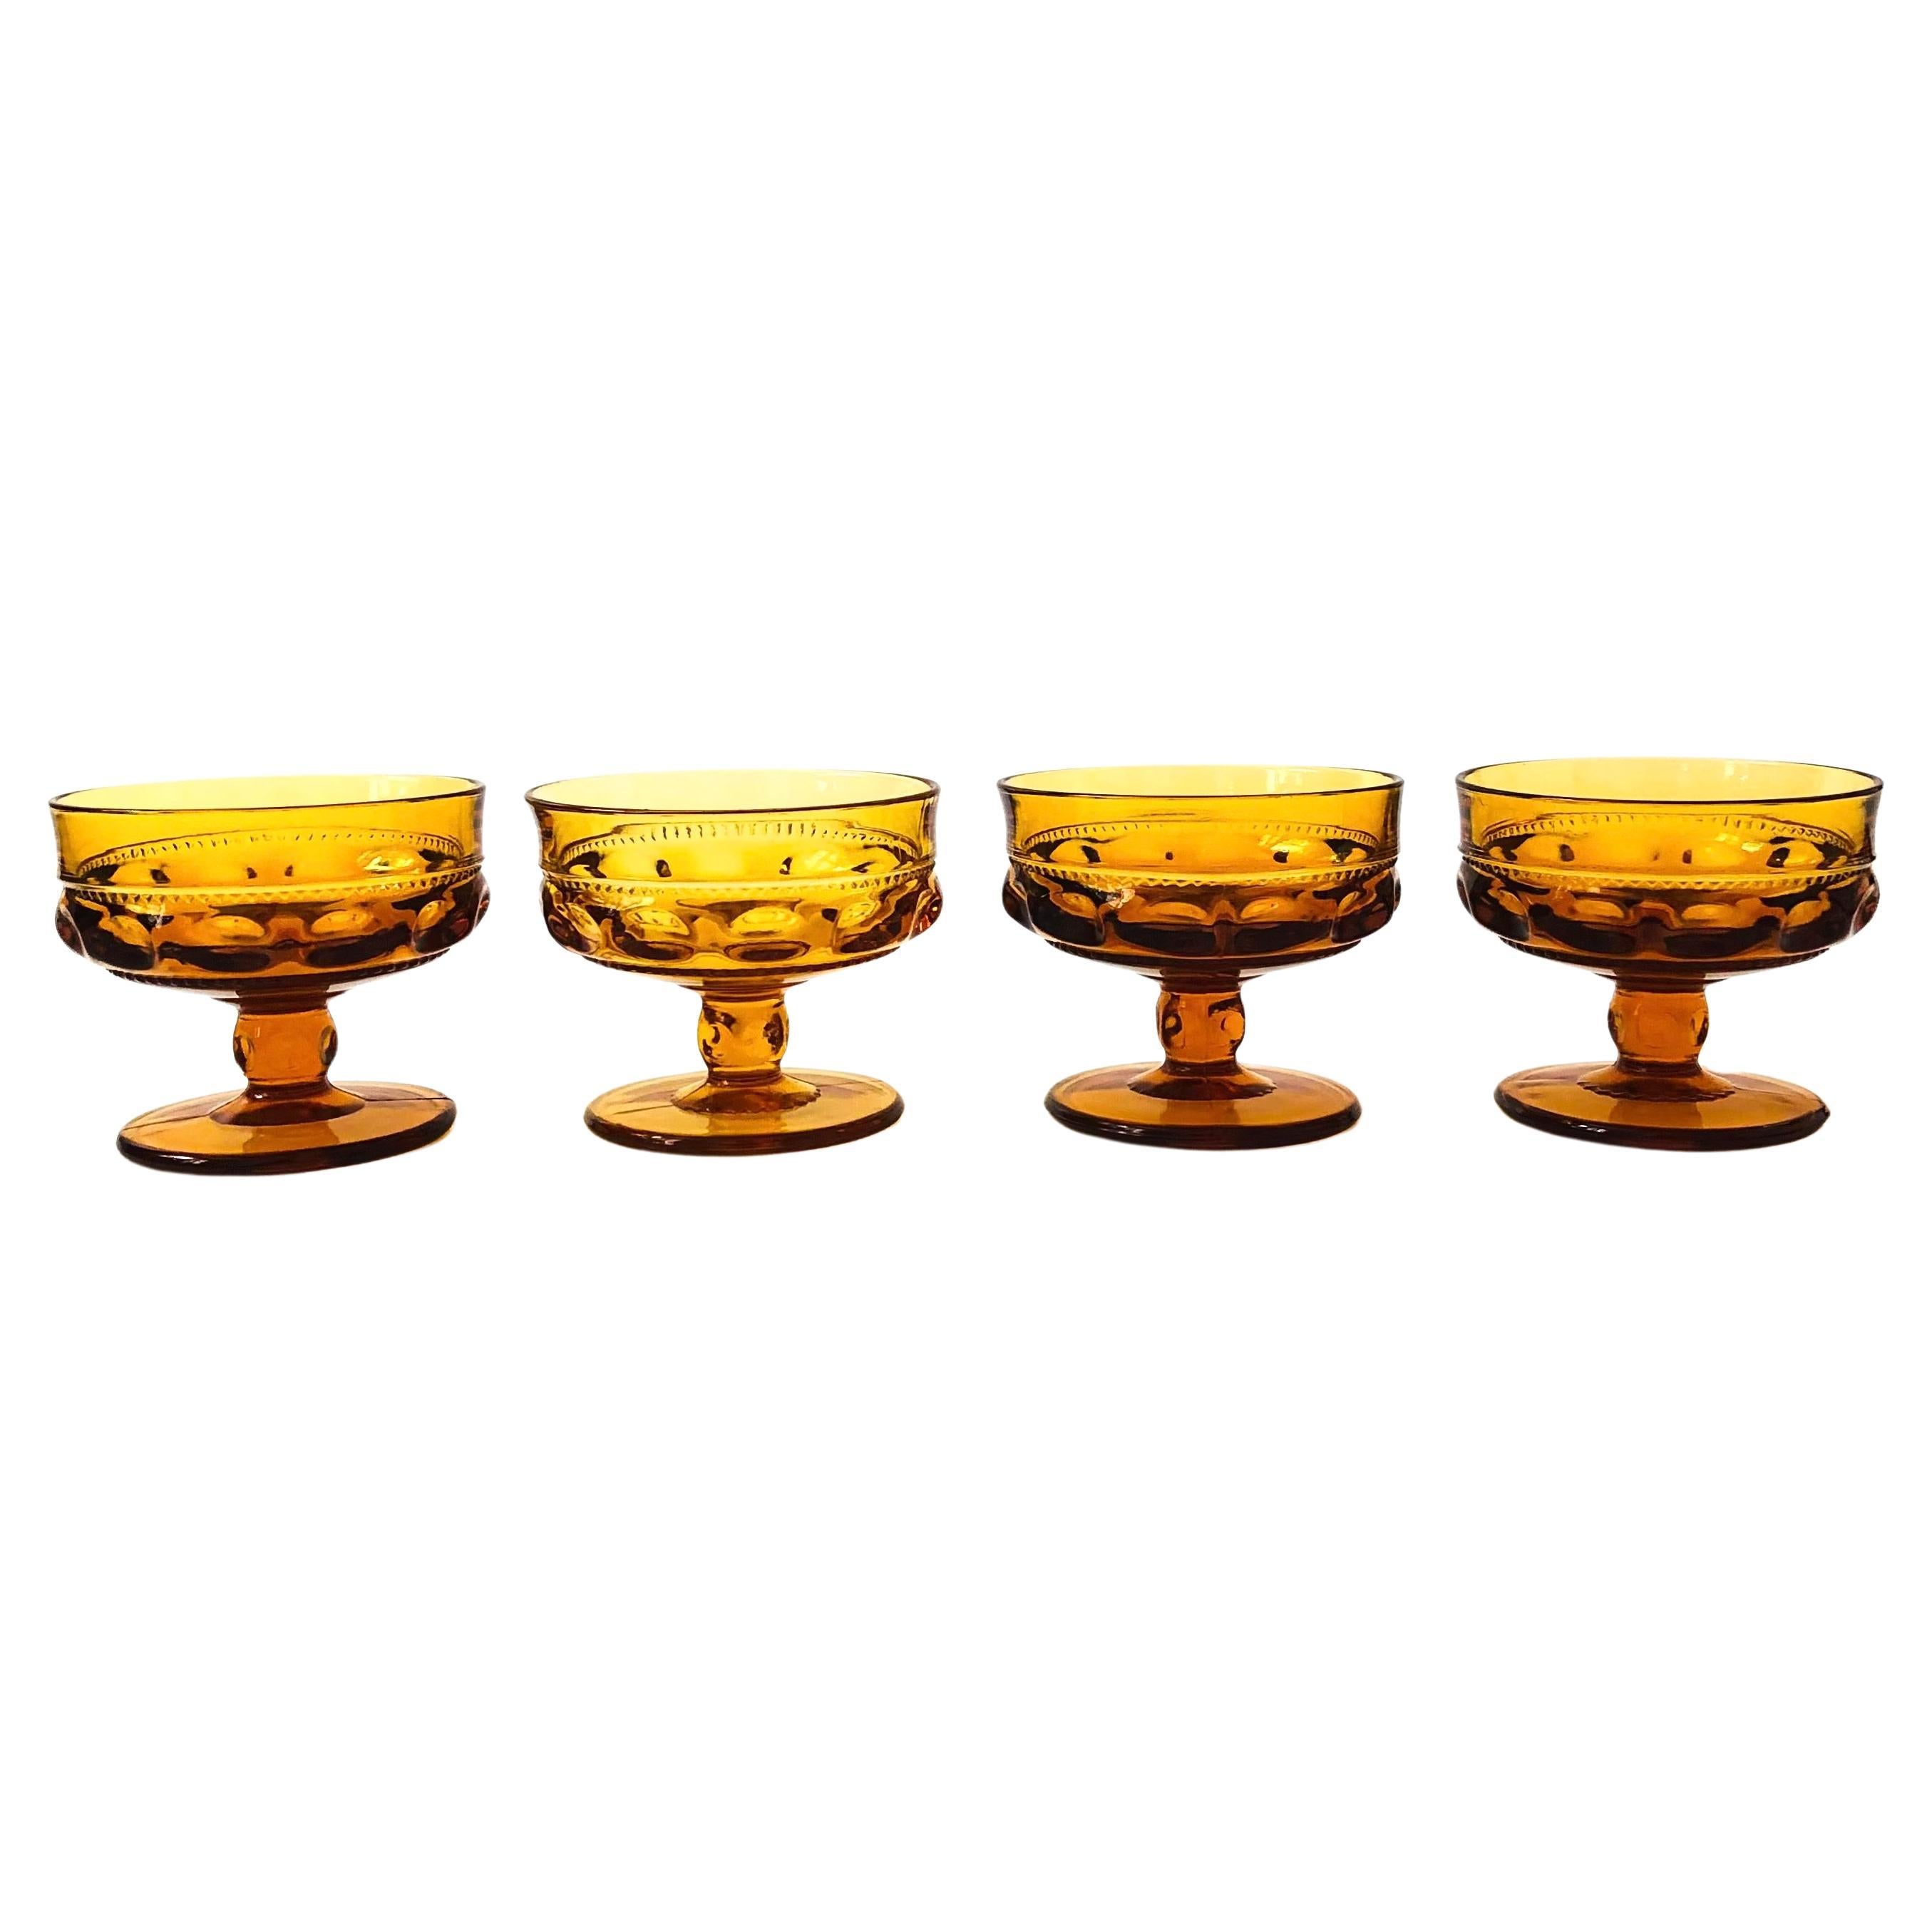 Amber Coupe Glasses - Set of 4 - Kings Crown Indiana Glass